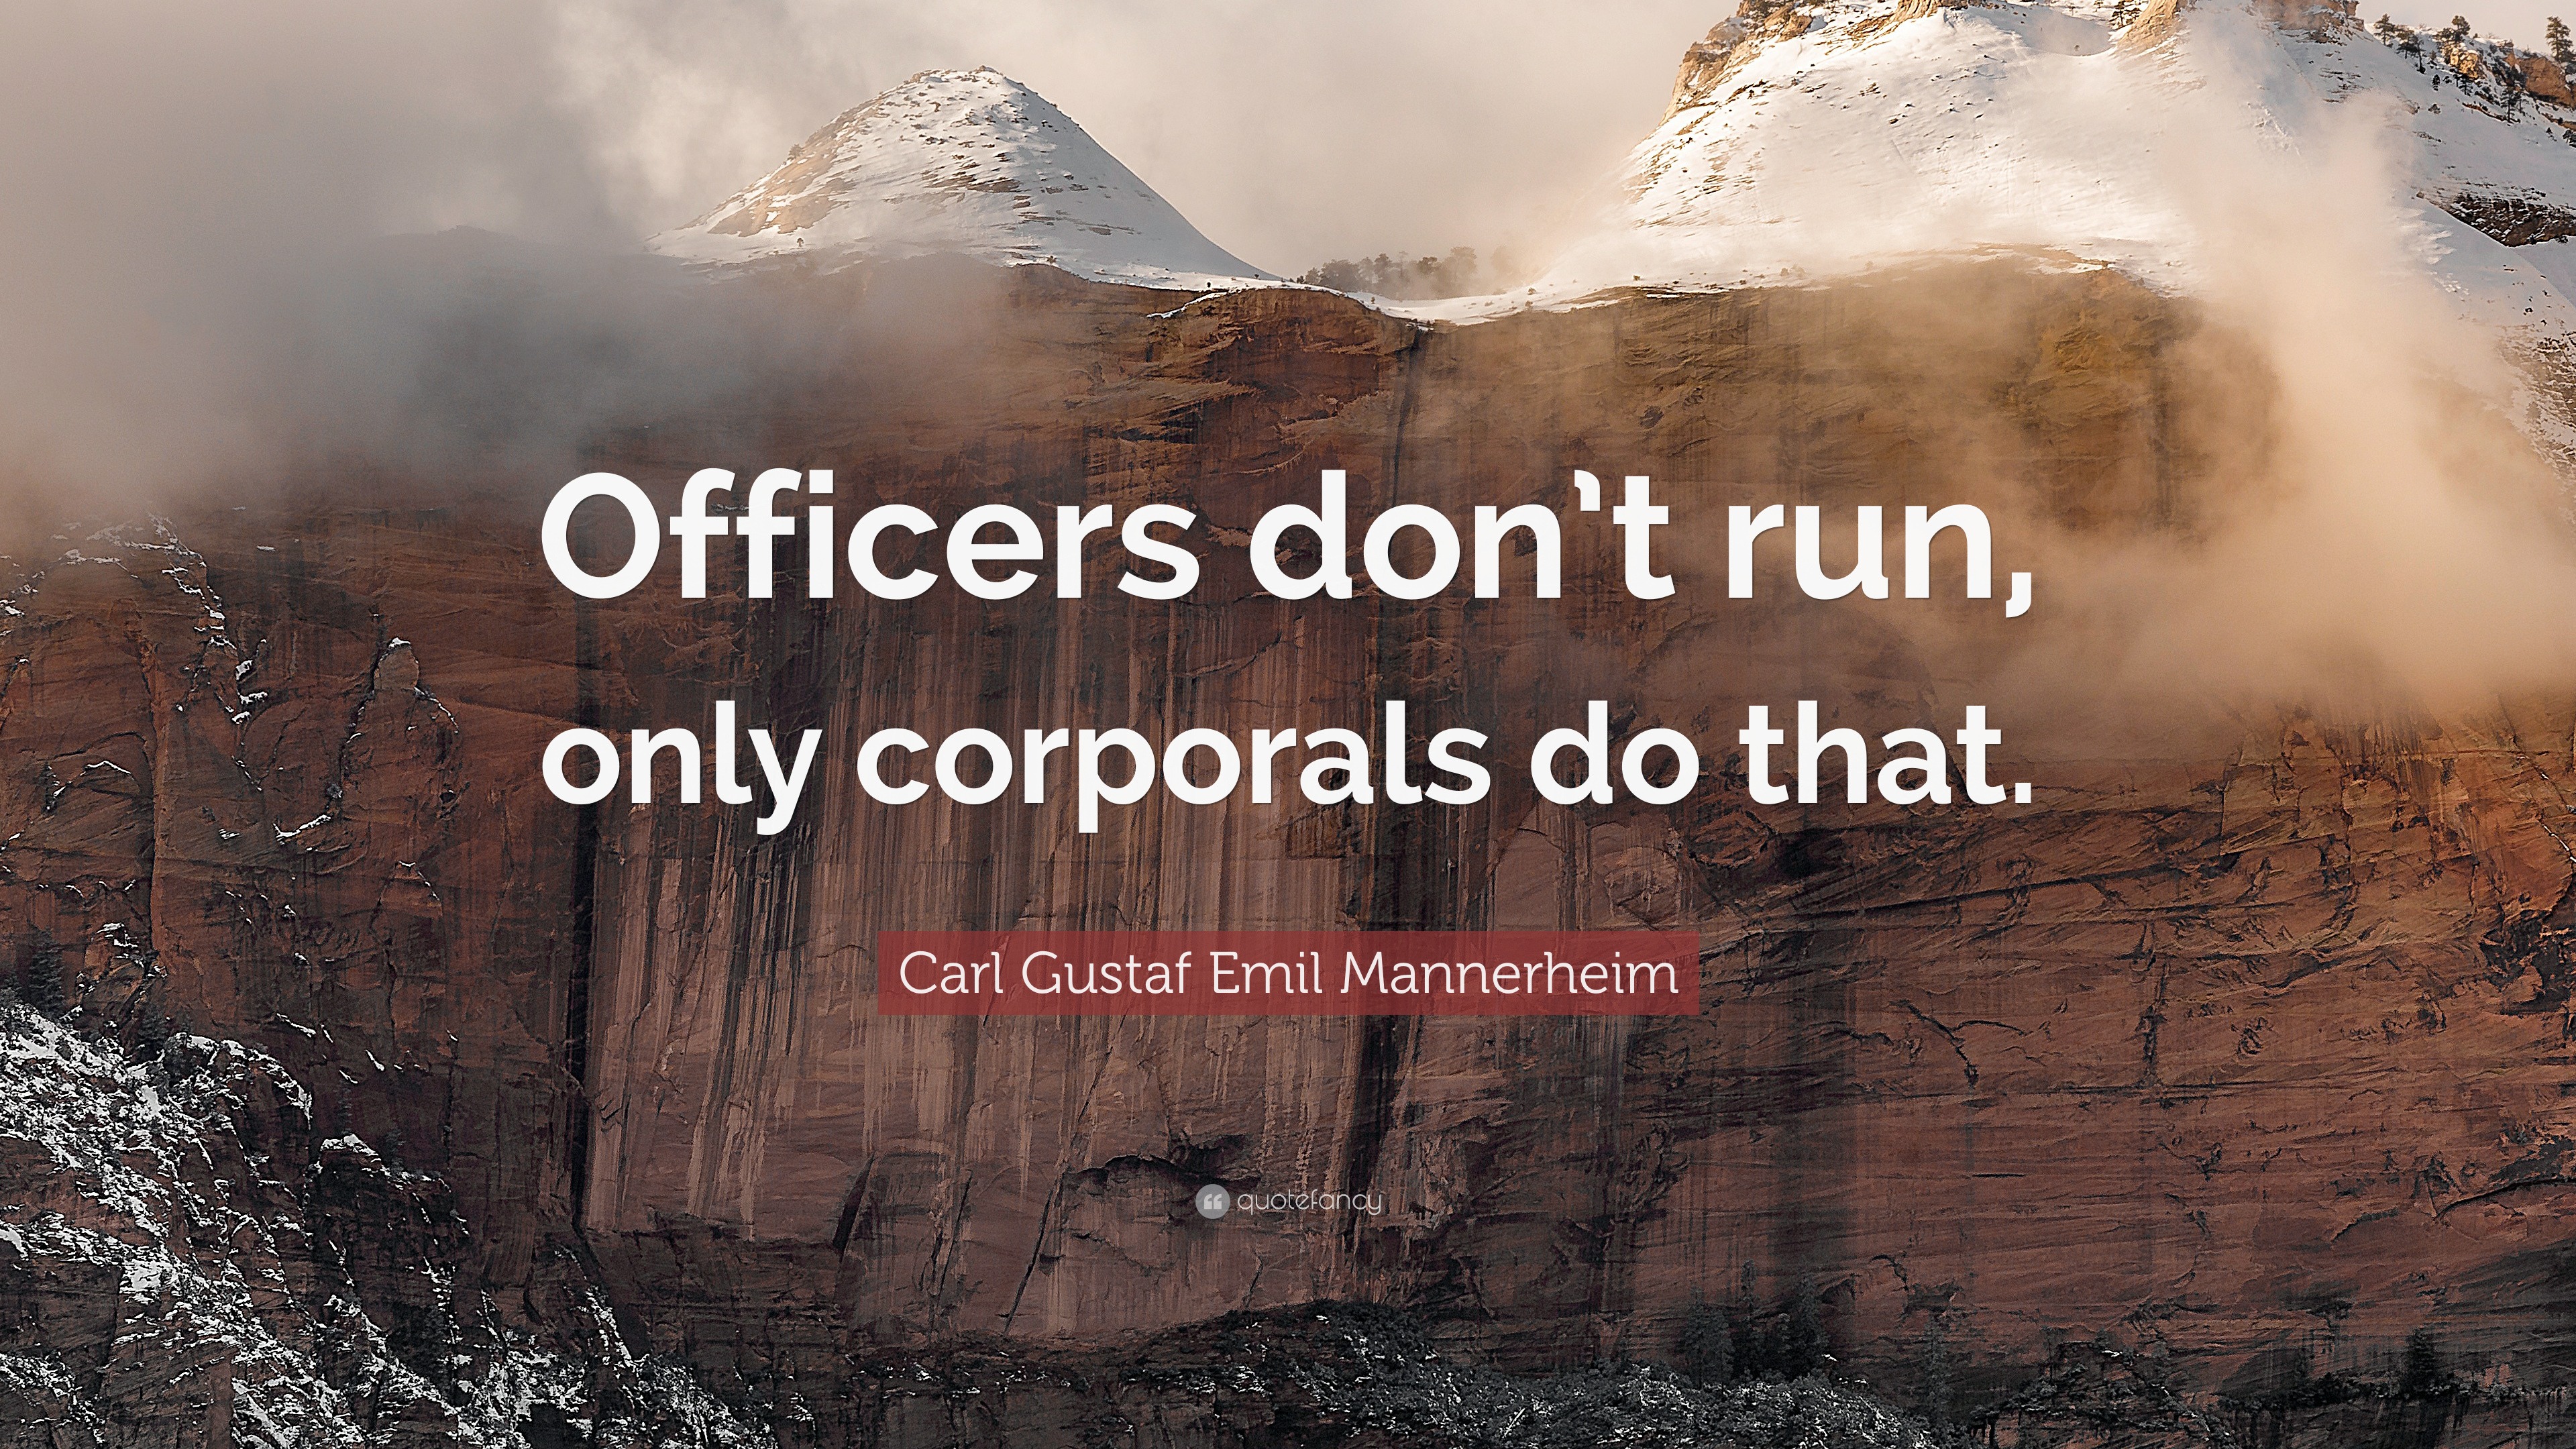 Carl Gustaf Emil Mannerheim Quote: “Officers Don't Run, Only Corporals Do That.”